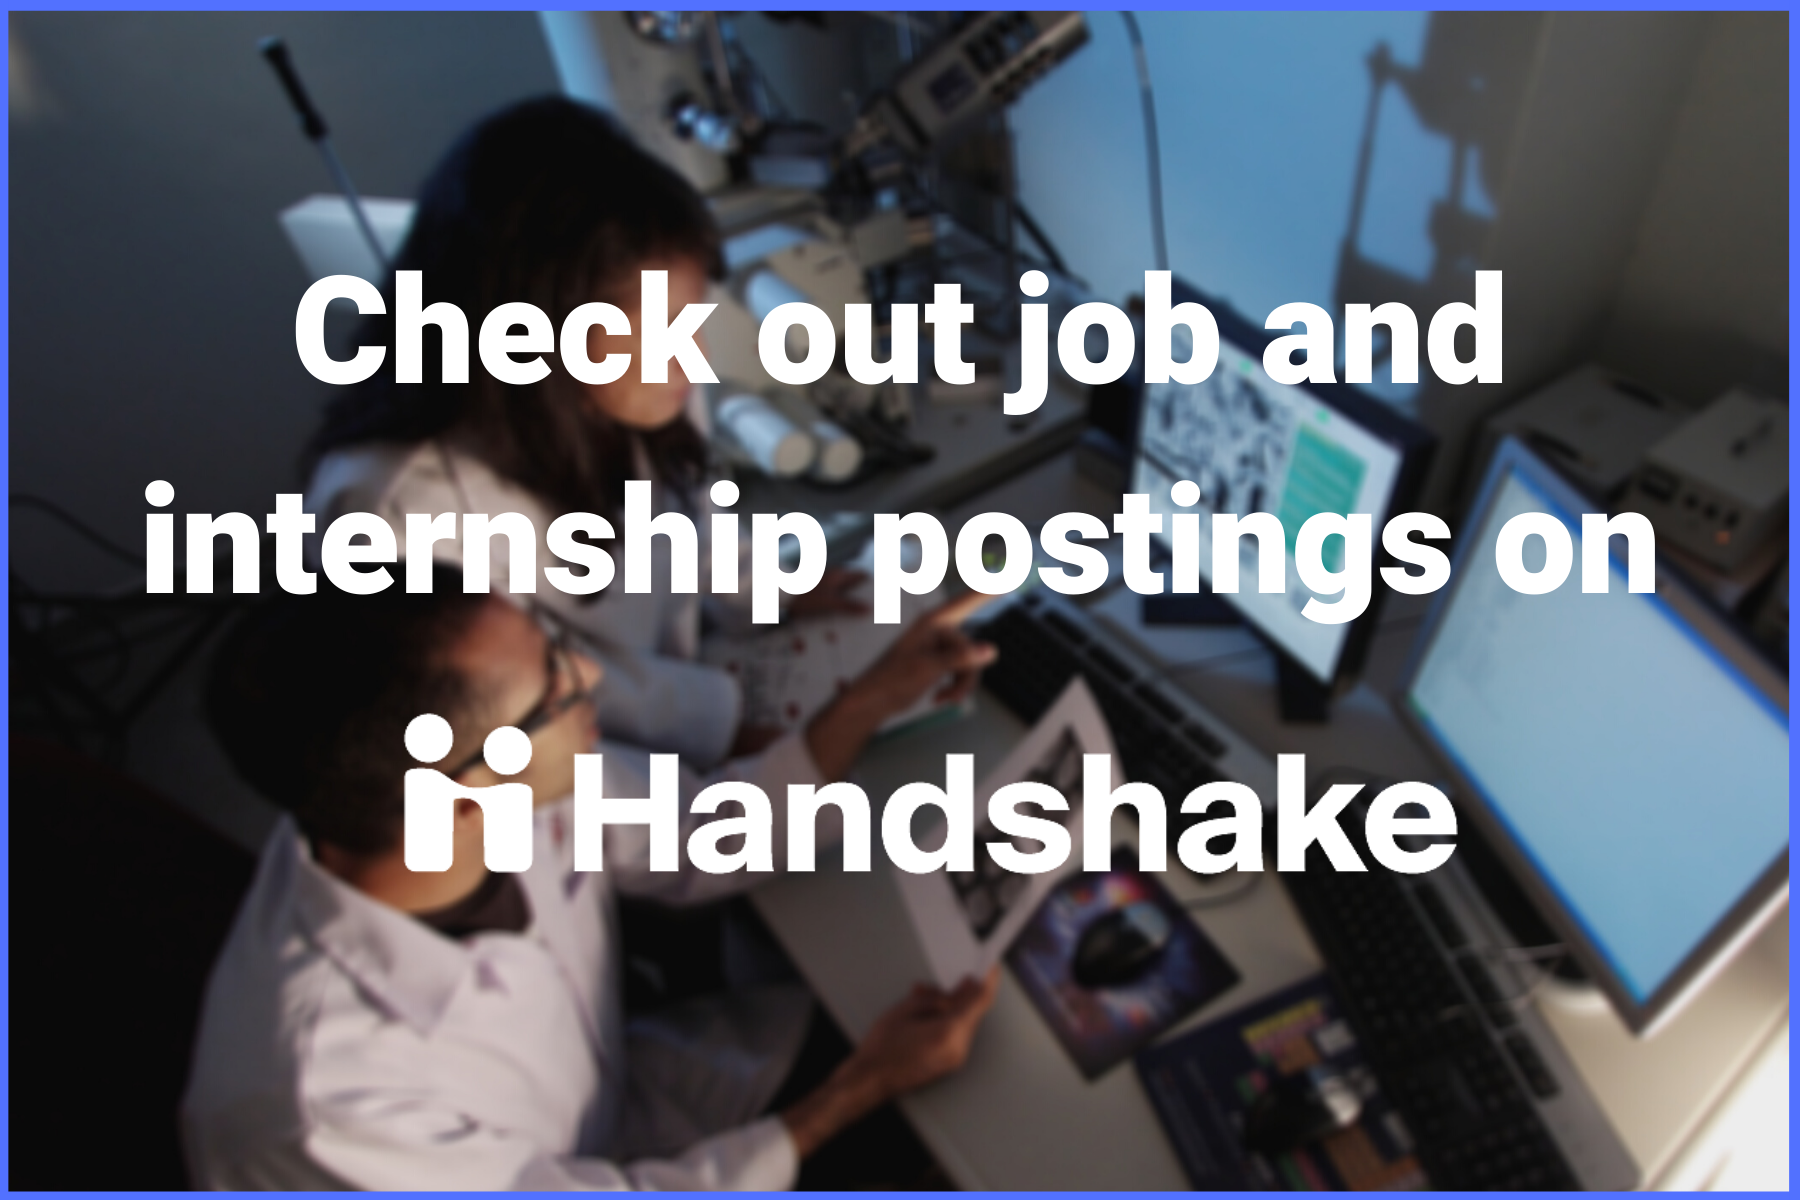 Find opportunities in science and research on Handshake